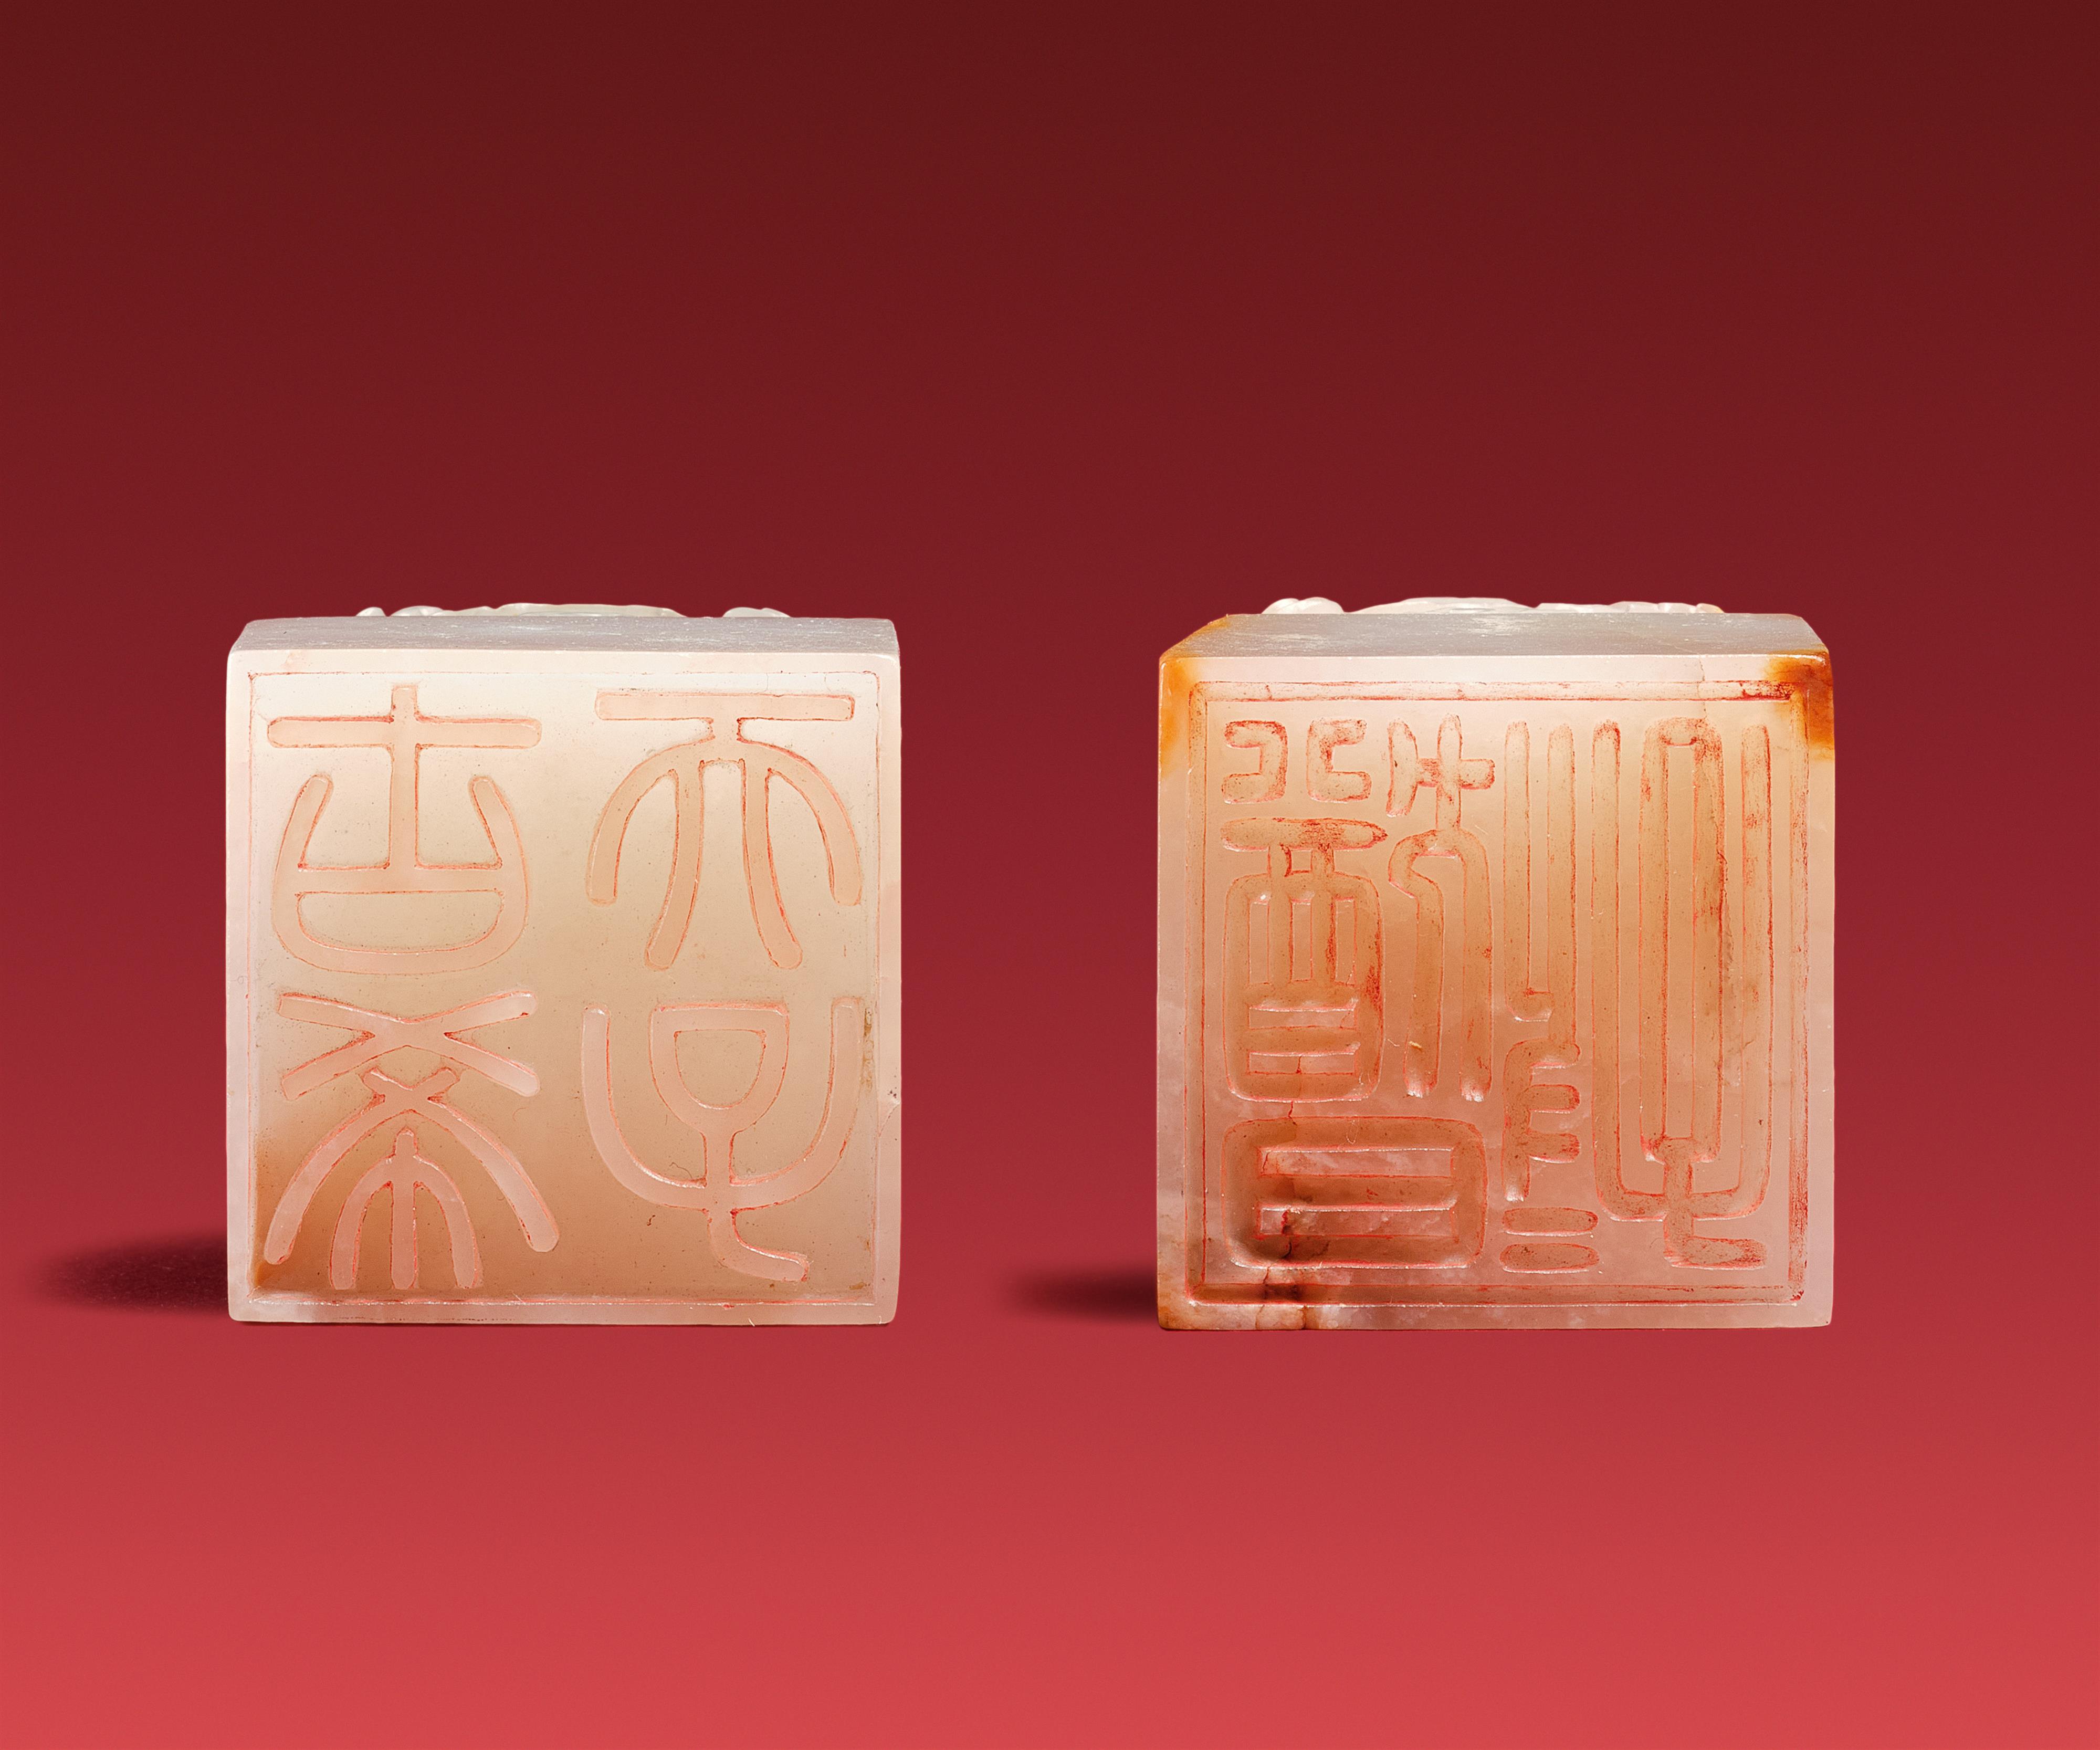 An extremely important pair of Imperial jade seals, "Guxi tianzi" and "Youri zizi". Qianlong period, around 1780-1789 - image-2